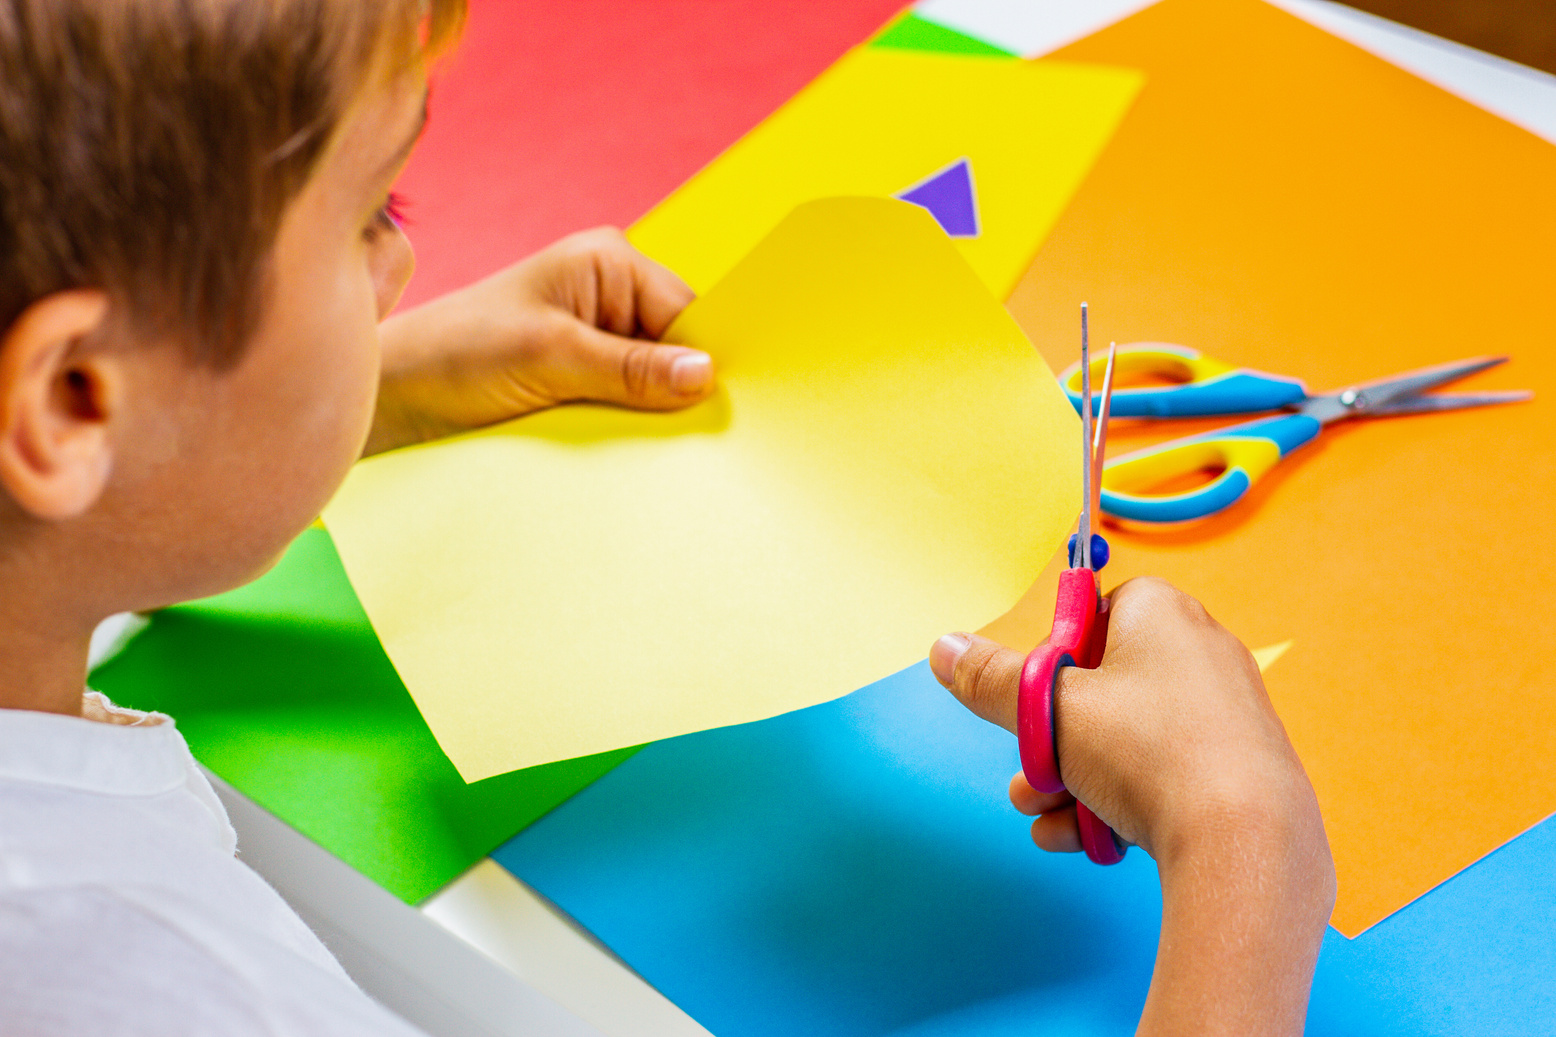 Child cutting colored paper with scissors at the table